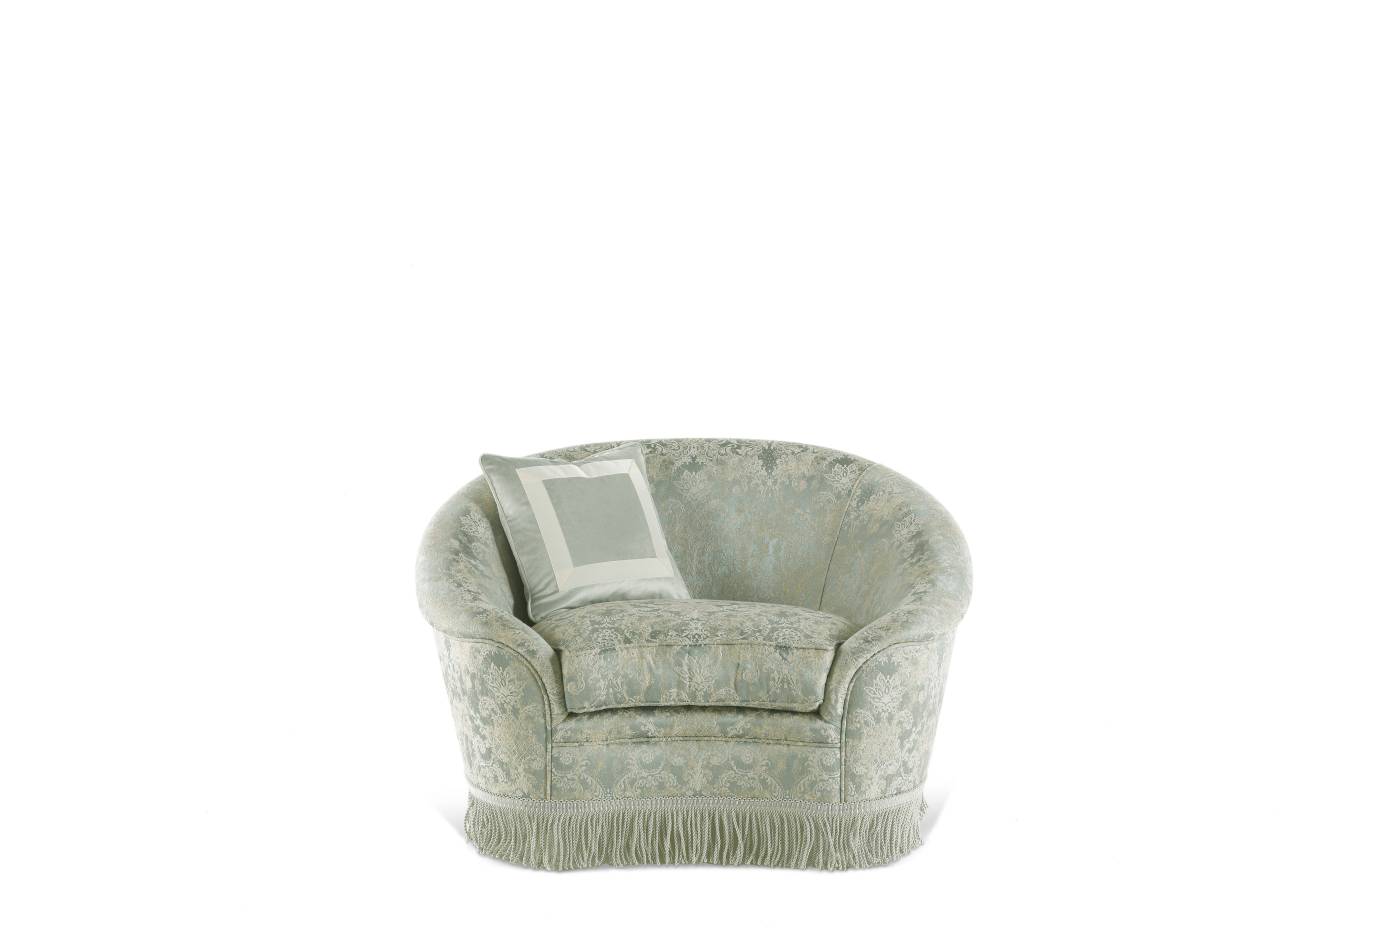 PLEASURE armchair - A luxury experience with the Savoir-Faire collection and its classic luxurious furniture